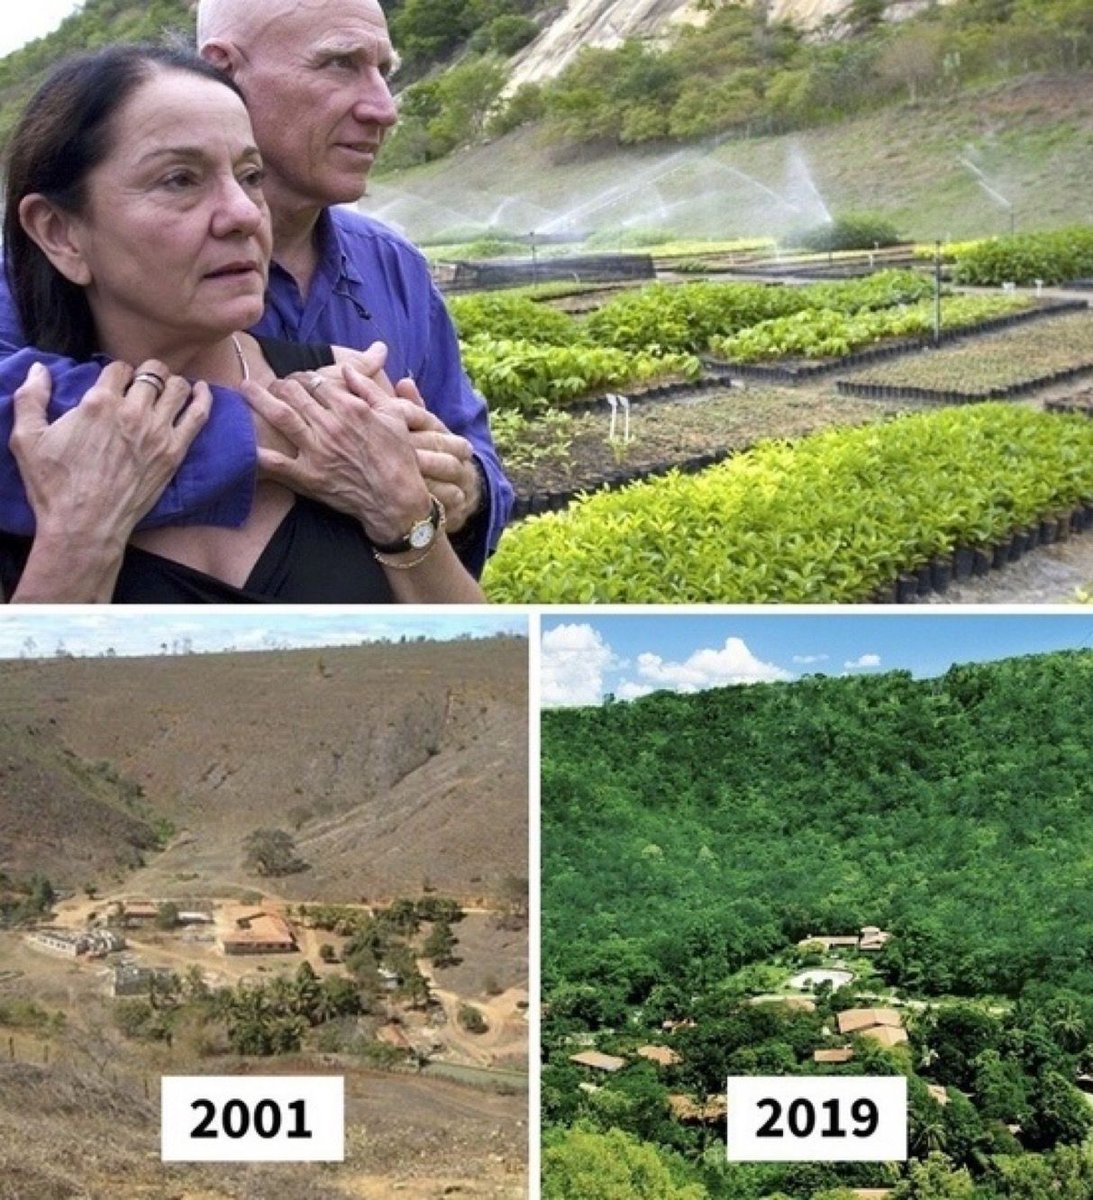 Over the course of the 20 years, Sebastiao Salgado and his wife planted an astonishing 2.7 million trees in Brazil 🇧🇷!

They rejuvenated 1,500 acres of rainforest, and the site became home to 293 plant species, 172 bird species, and 33 animal species.

@Debbie_banks30